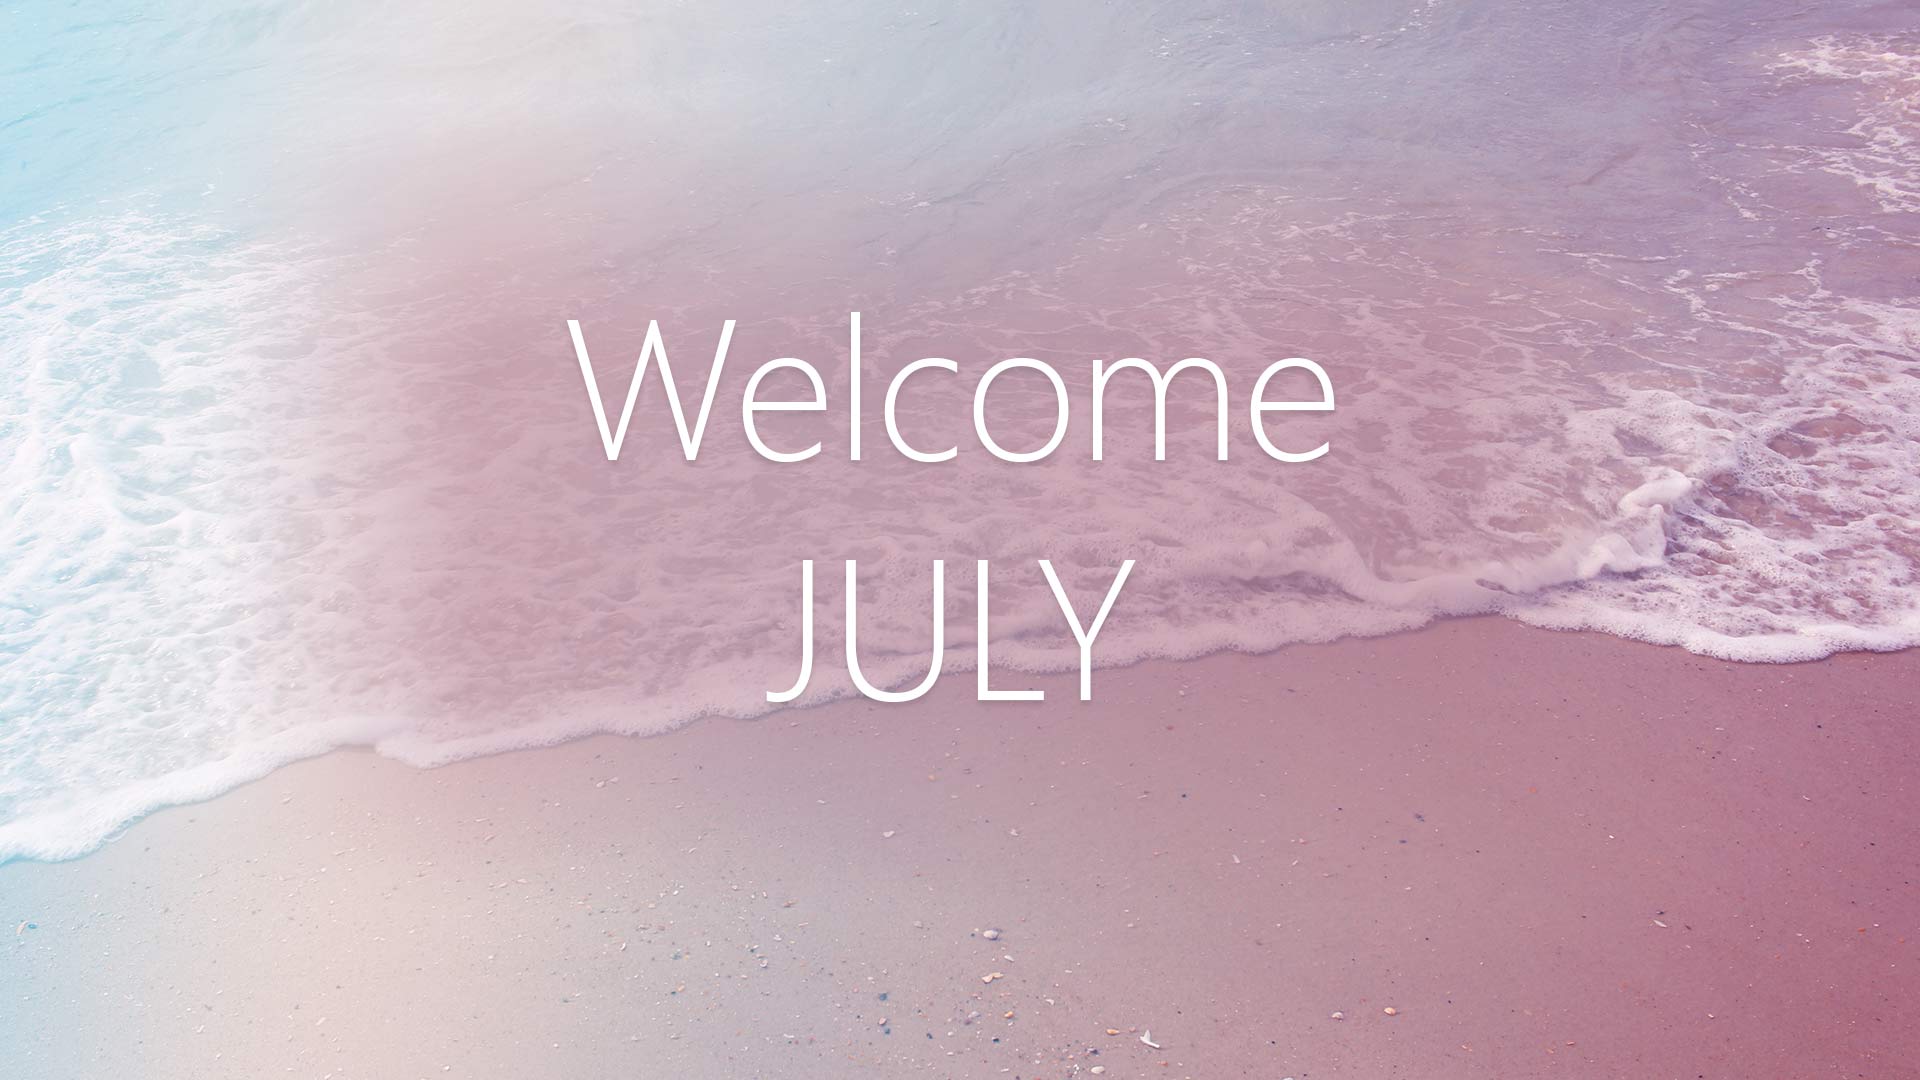 Welcome July Image Picture Photo Wallpaper, Goodbye June Month